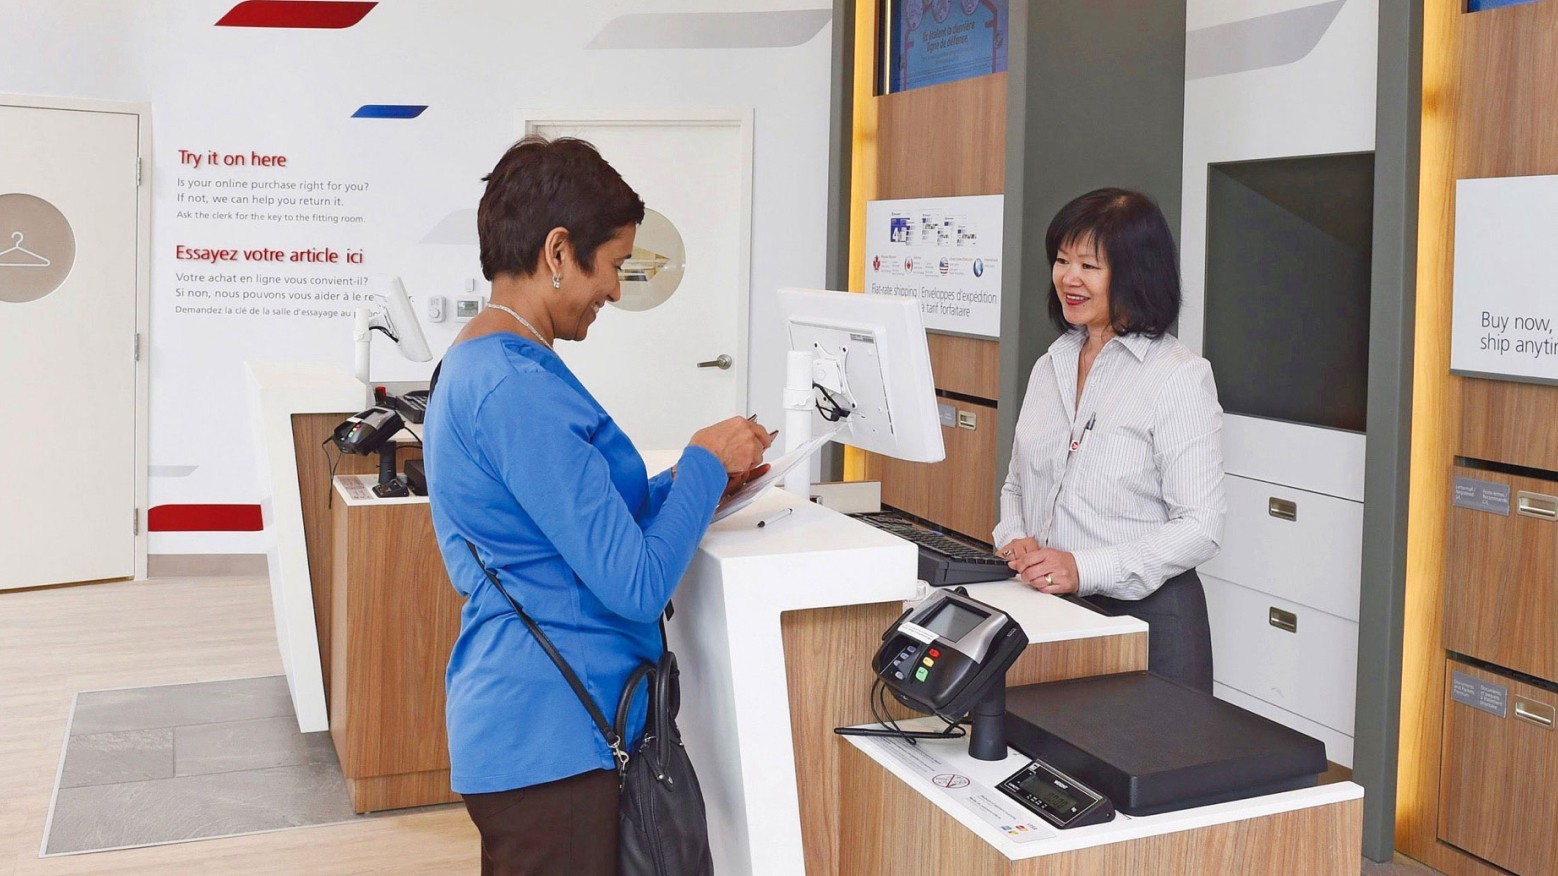 A woman reloads her Cash Passport card at Canada Post counter by presenting her government-issued photo ID.